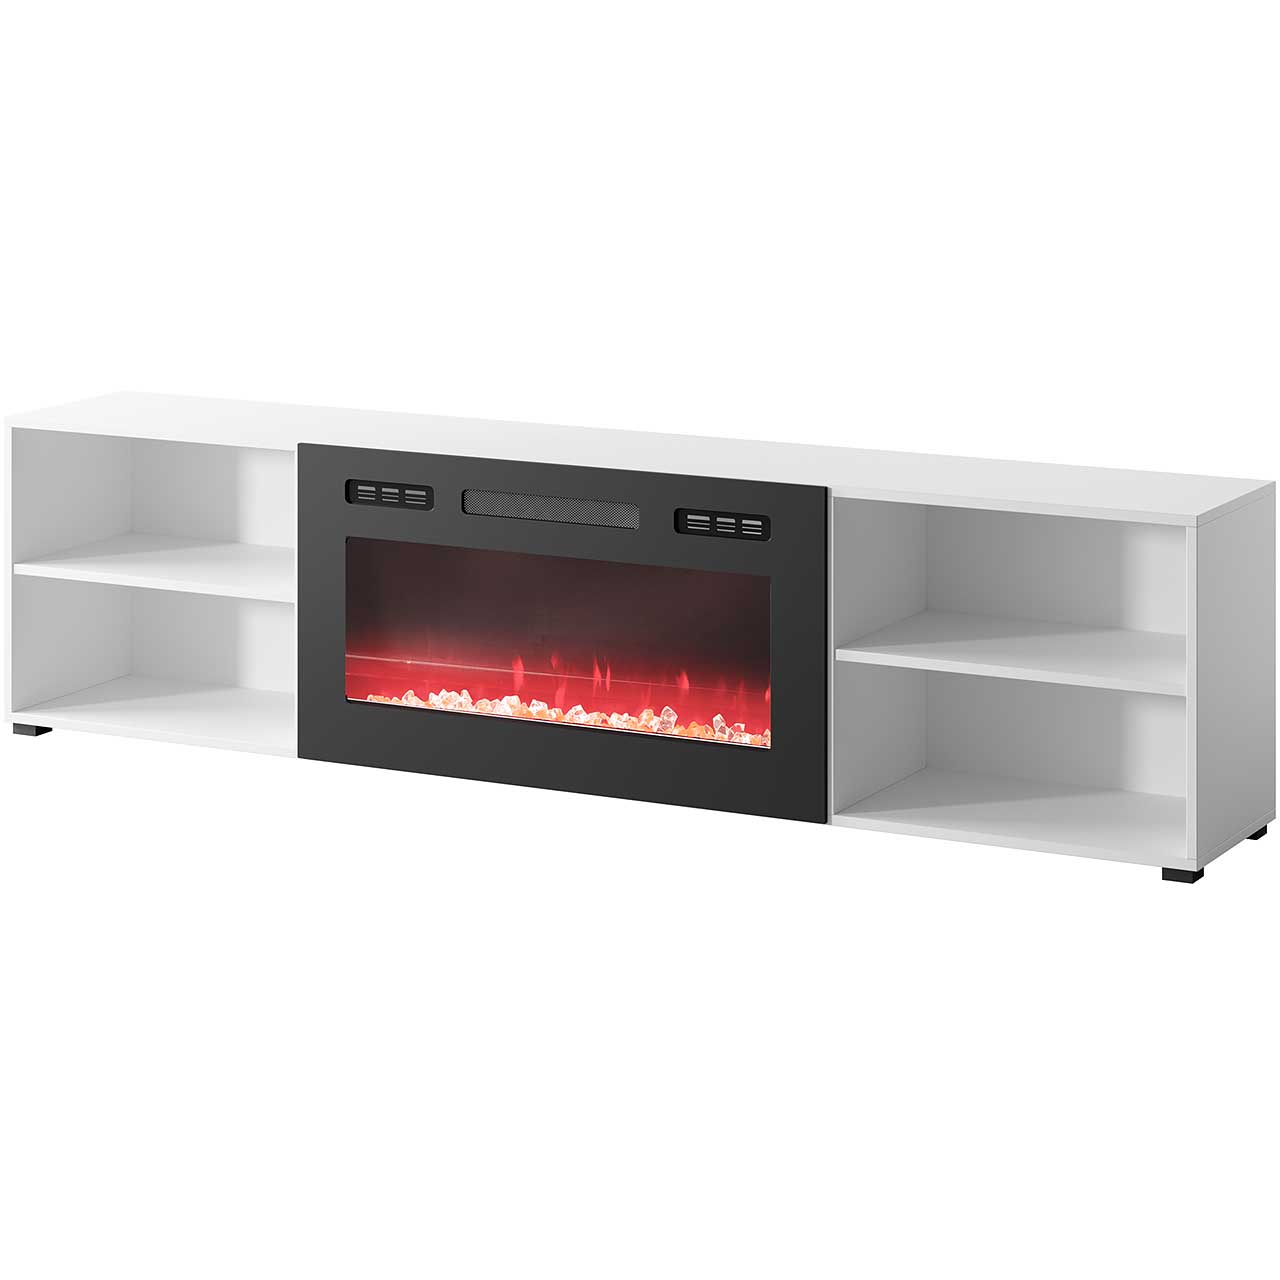 TV Cabinet POLO 200 EF white / fireplace black